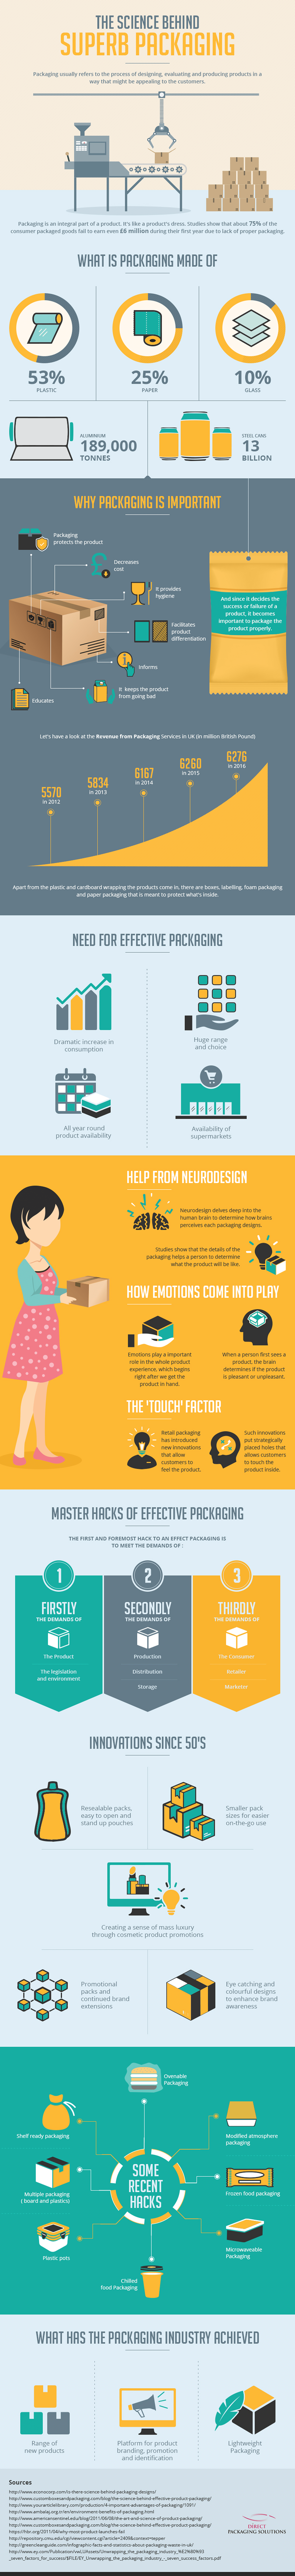 The Science Behind Superb Packaging [Infographic]